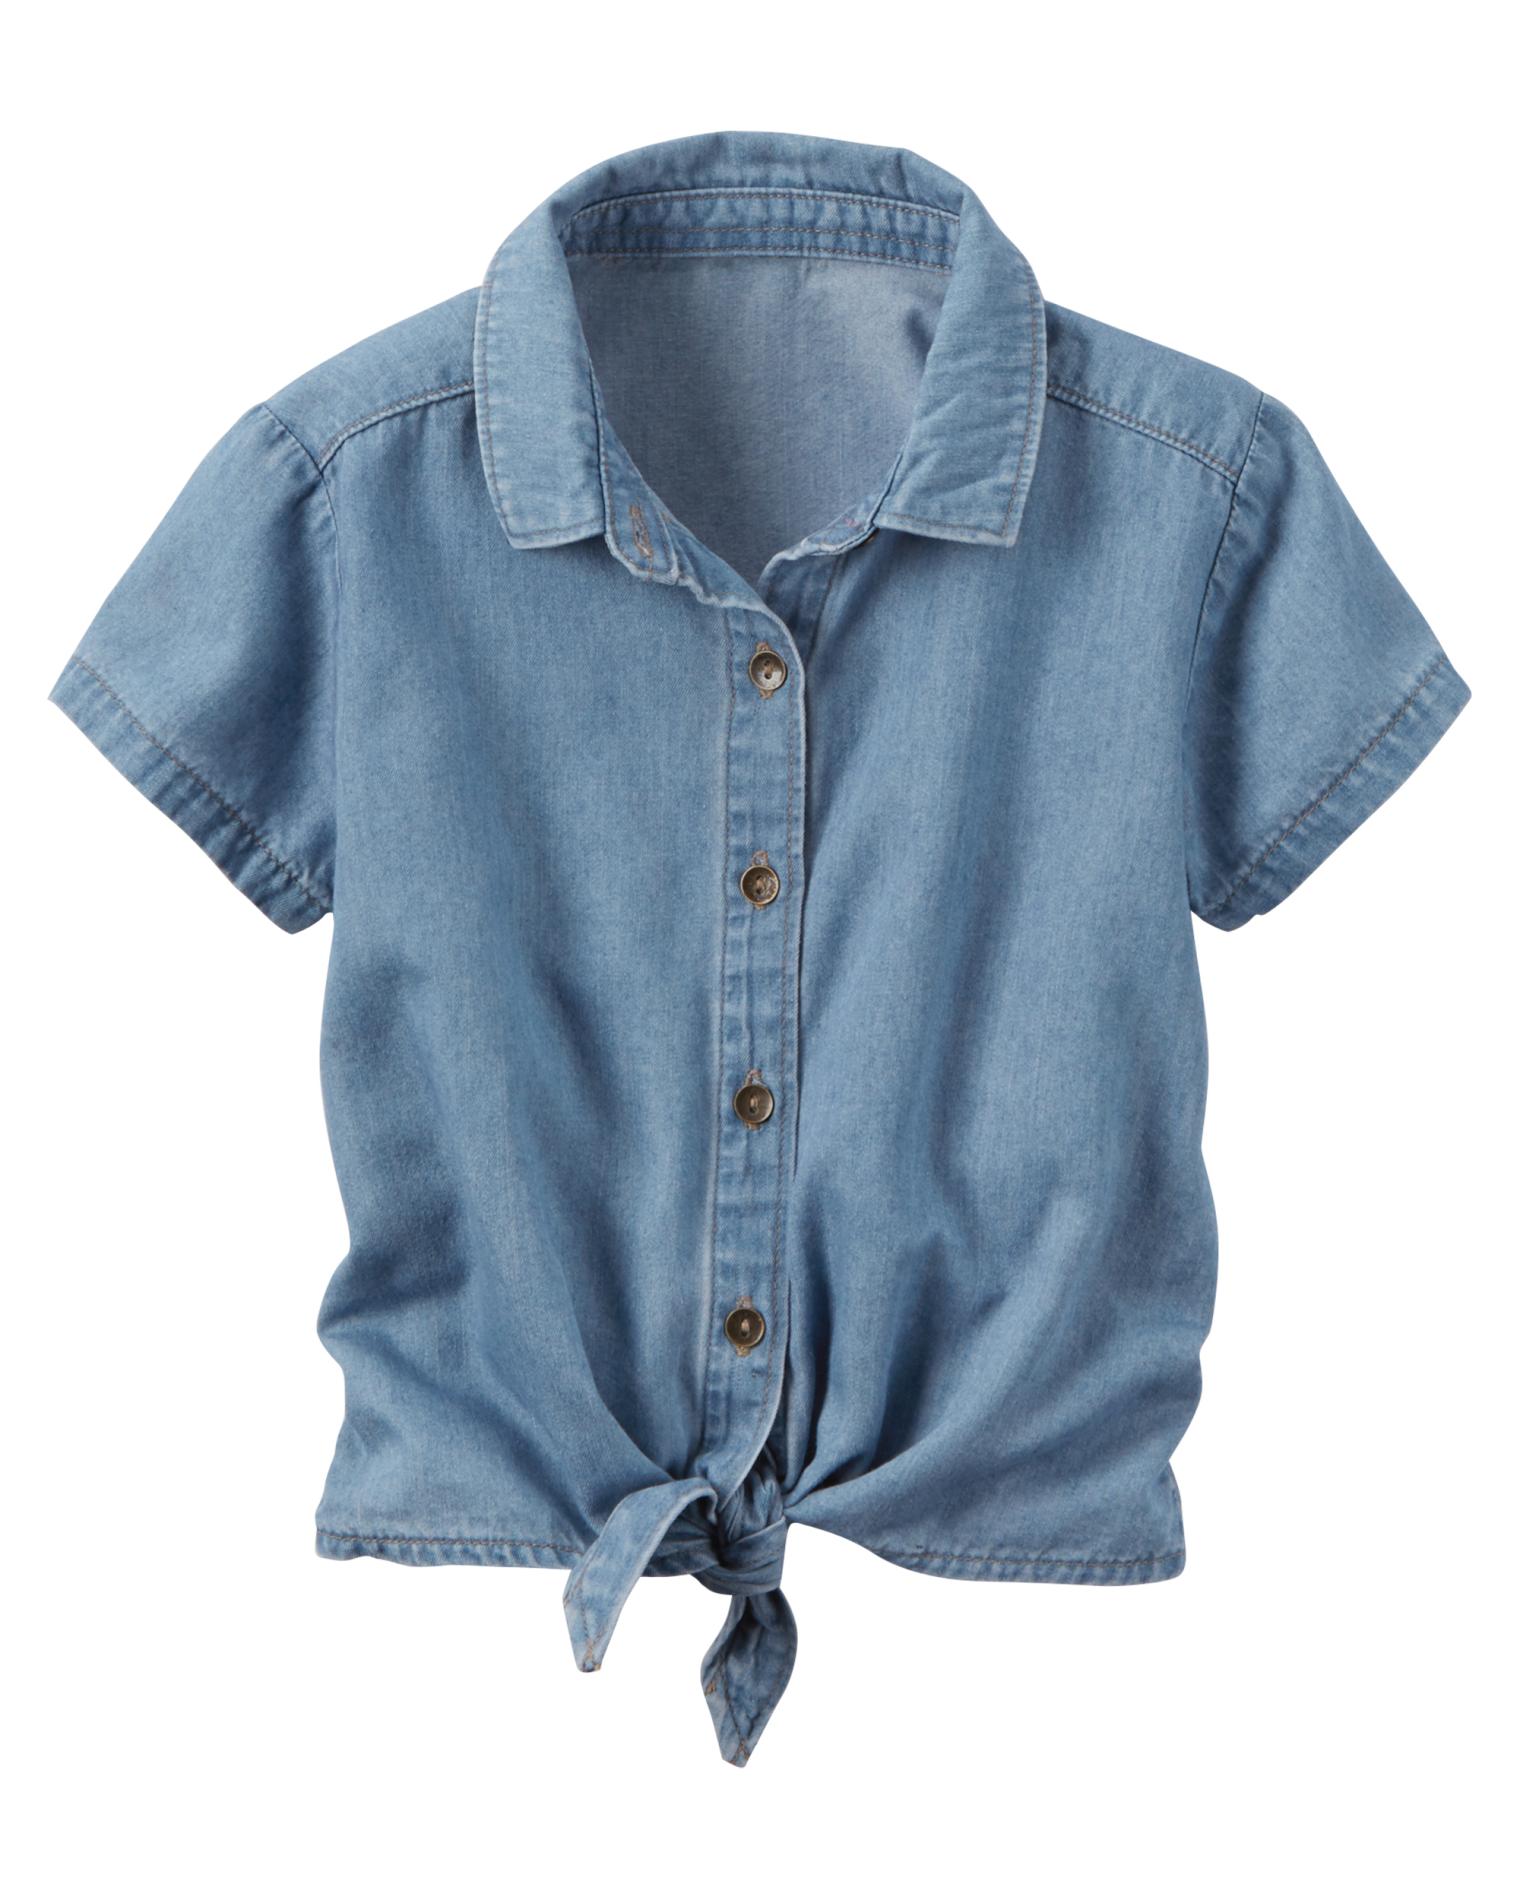 Carter's Girls' Chambray Tie-Front Shirt